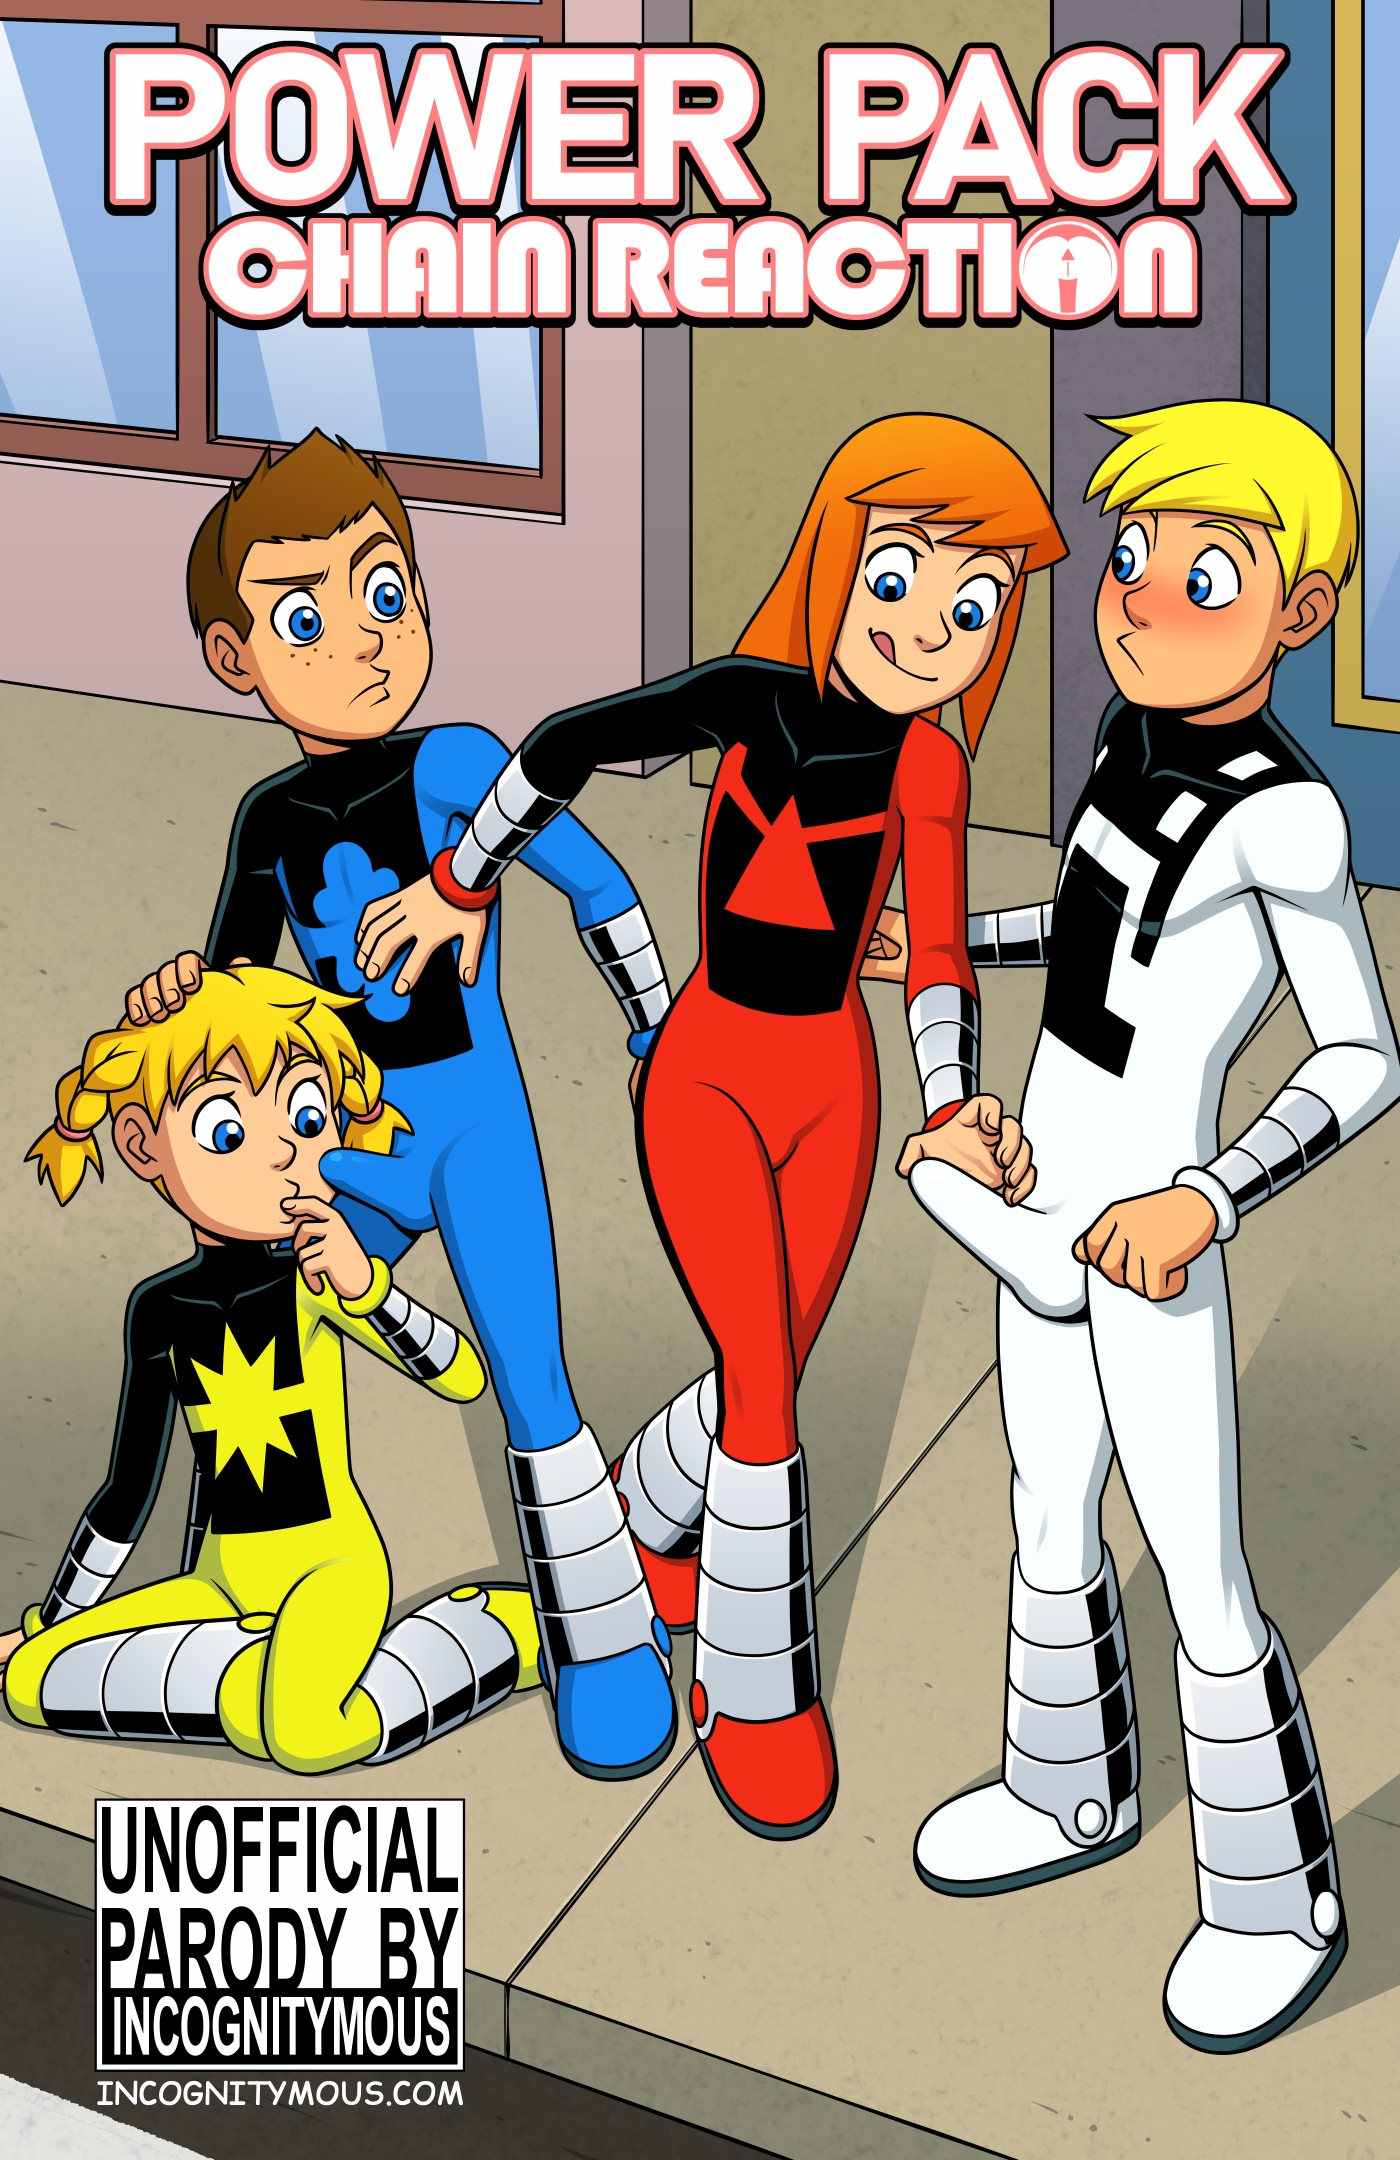 Power Pack - Chain Reaction incognitymous full - Comics Army